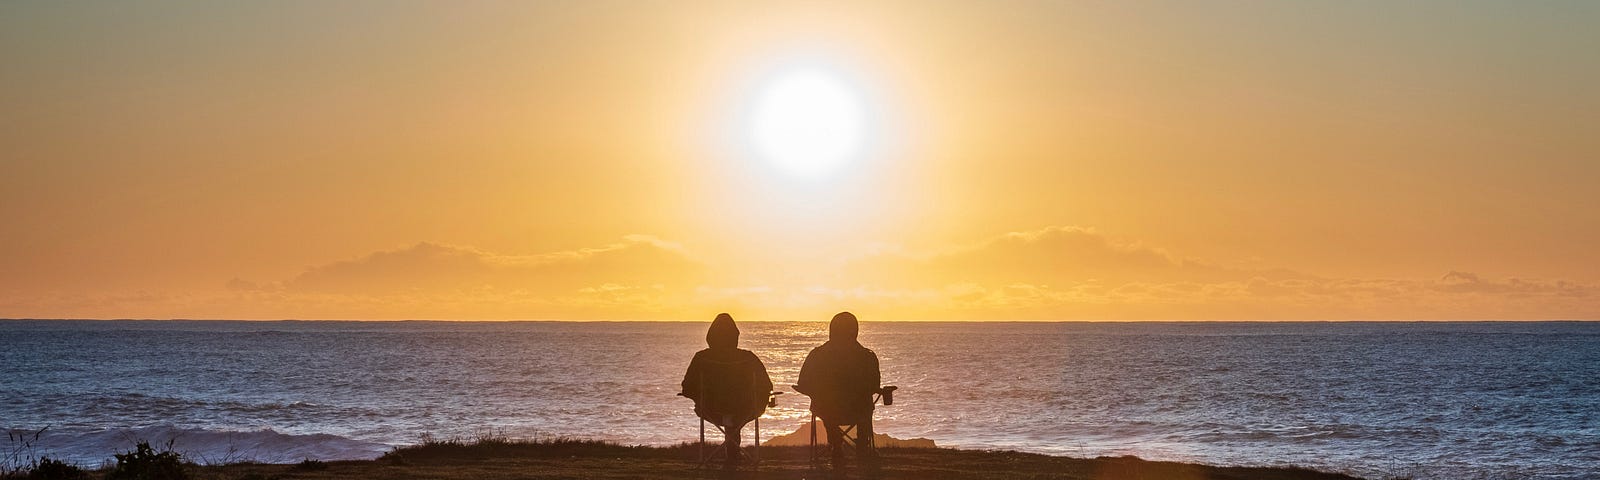 People sitting on the beach at sunset